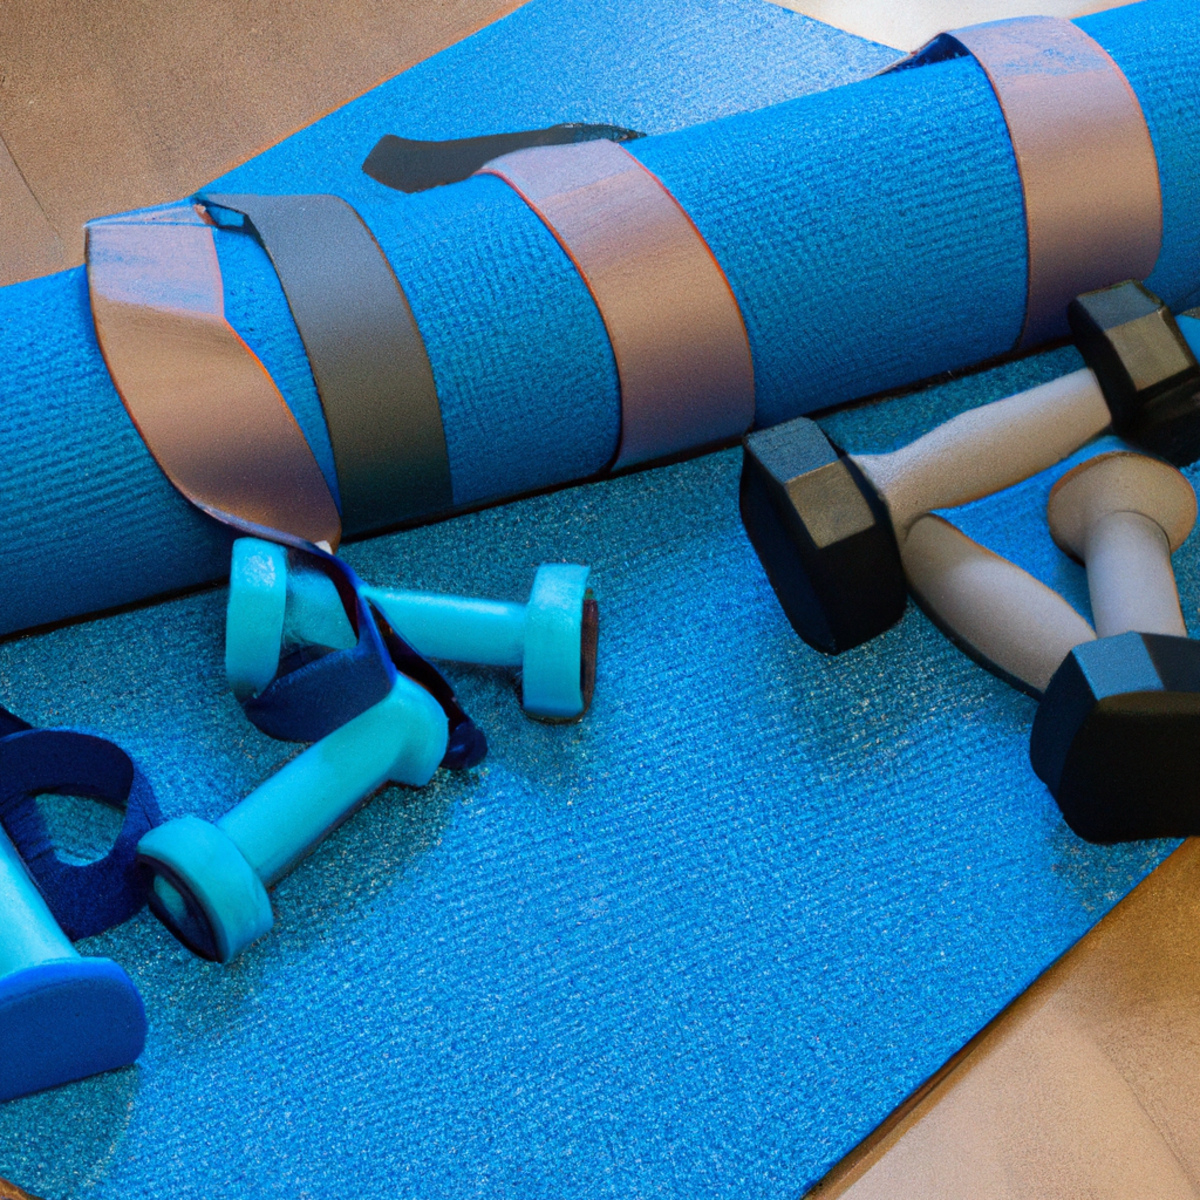 The photo shows a set of dumbbells, a resistance band, and a yoga mat laid out on the floor. The dumbbells are of different weights, ranging from light to heavy, and are placed next to each other. The resistance band is stretched out and held in place by the dumbbells. The yoga mat is rolled out and positioned in the center of the frame. The objects are arranged in a way that suggests they are ready to be used for a full-body workout routine. The lighting is bright and natural, highlighting the texture and details of each object.